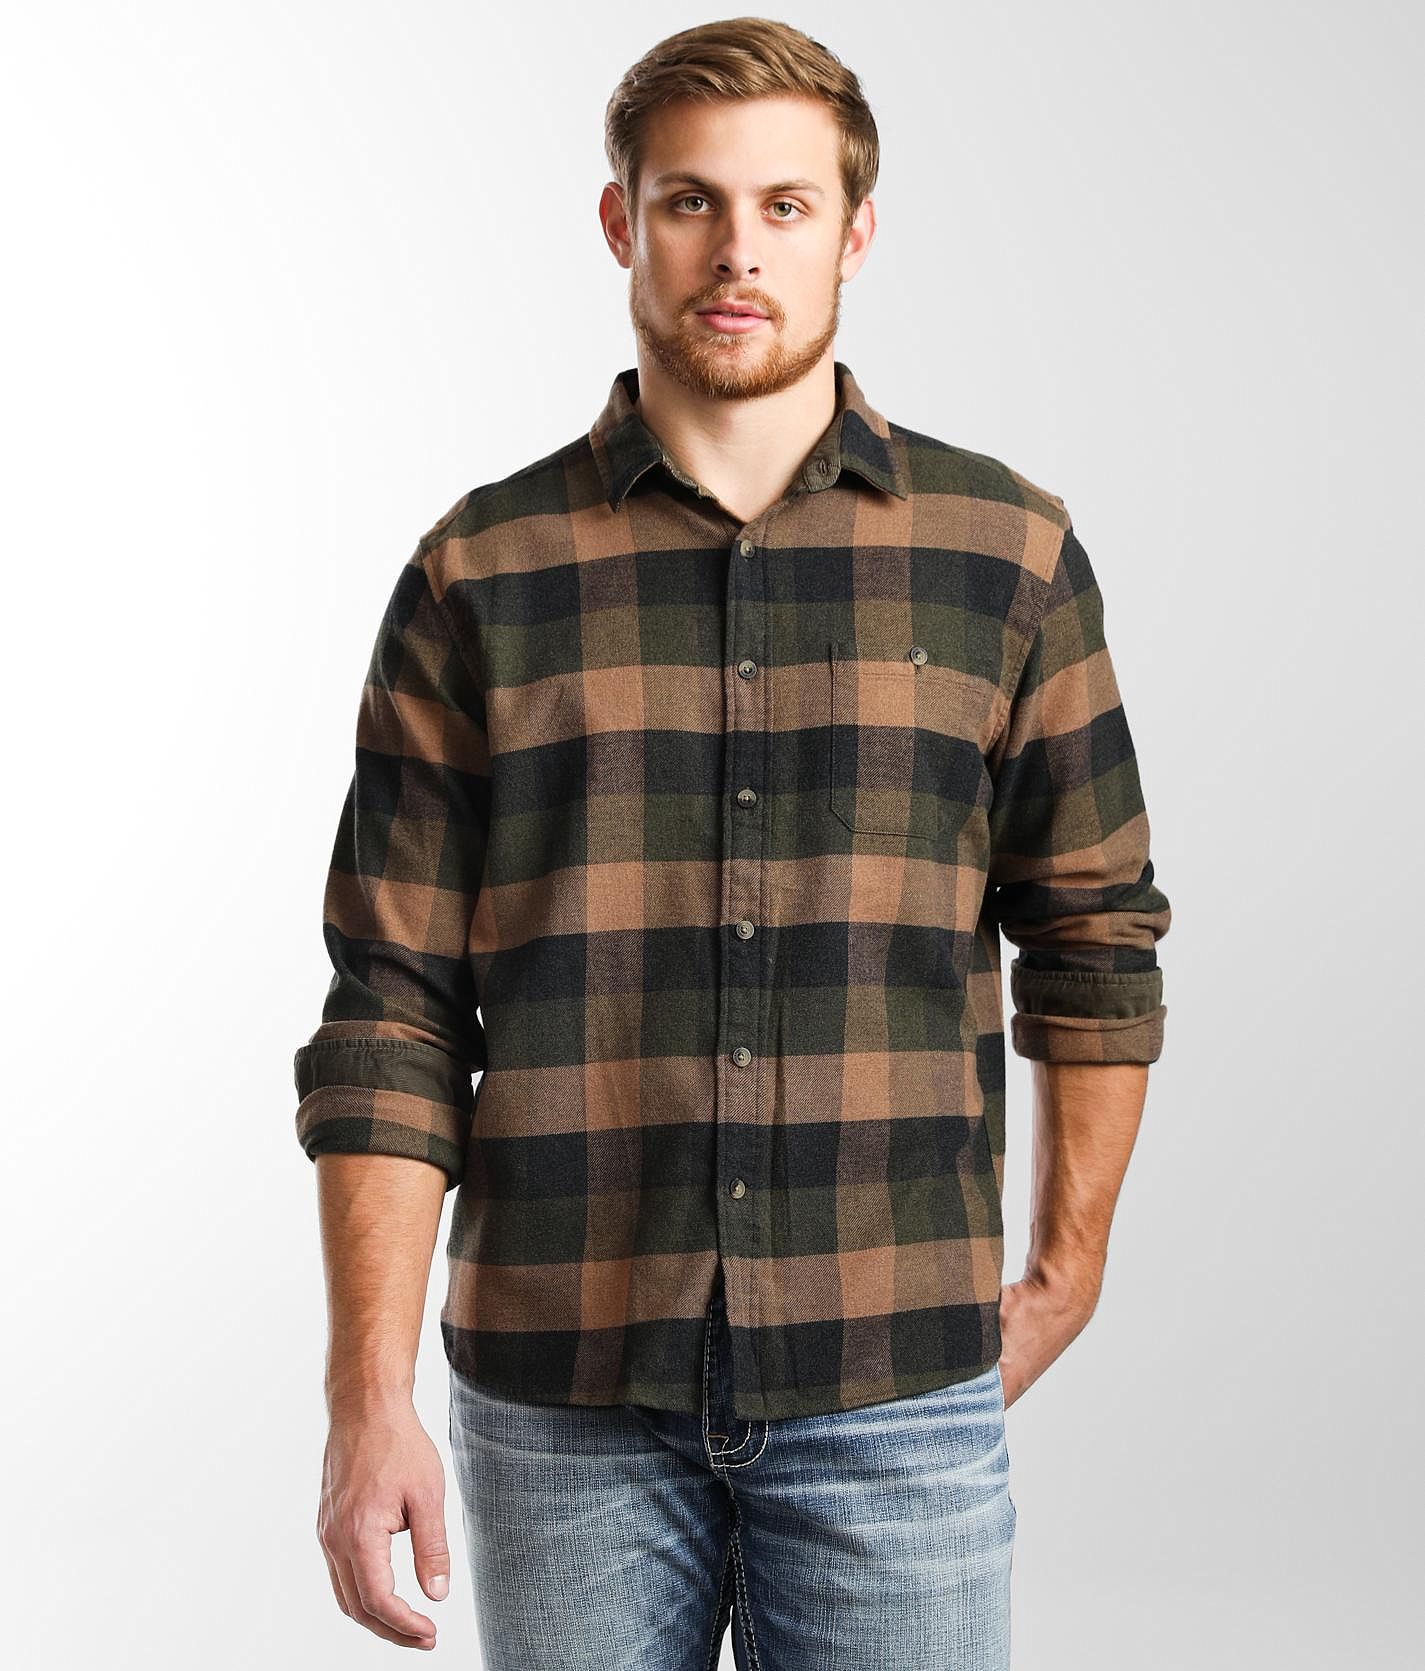 Freemont Double Brushed Flannel Shirt in Green and Brown Check by Pendleton  - Hansen's Clothing